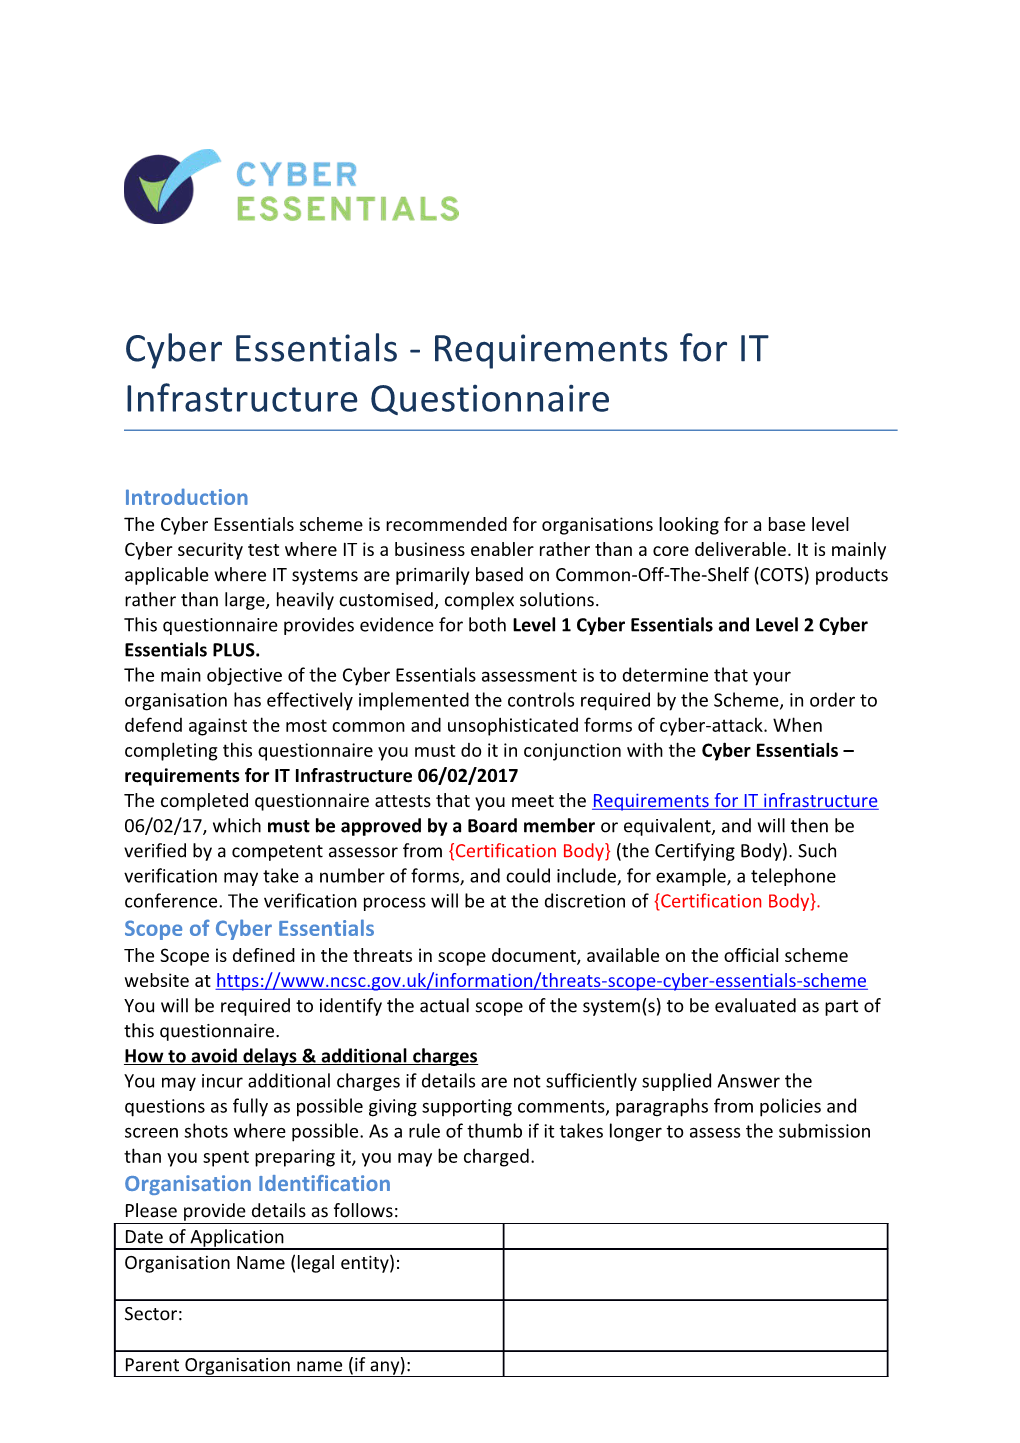 Cyber Essentials - Requirements for IT Infrastructure Questionnaire